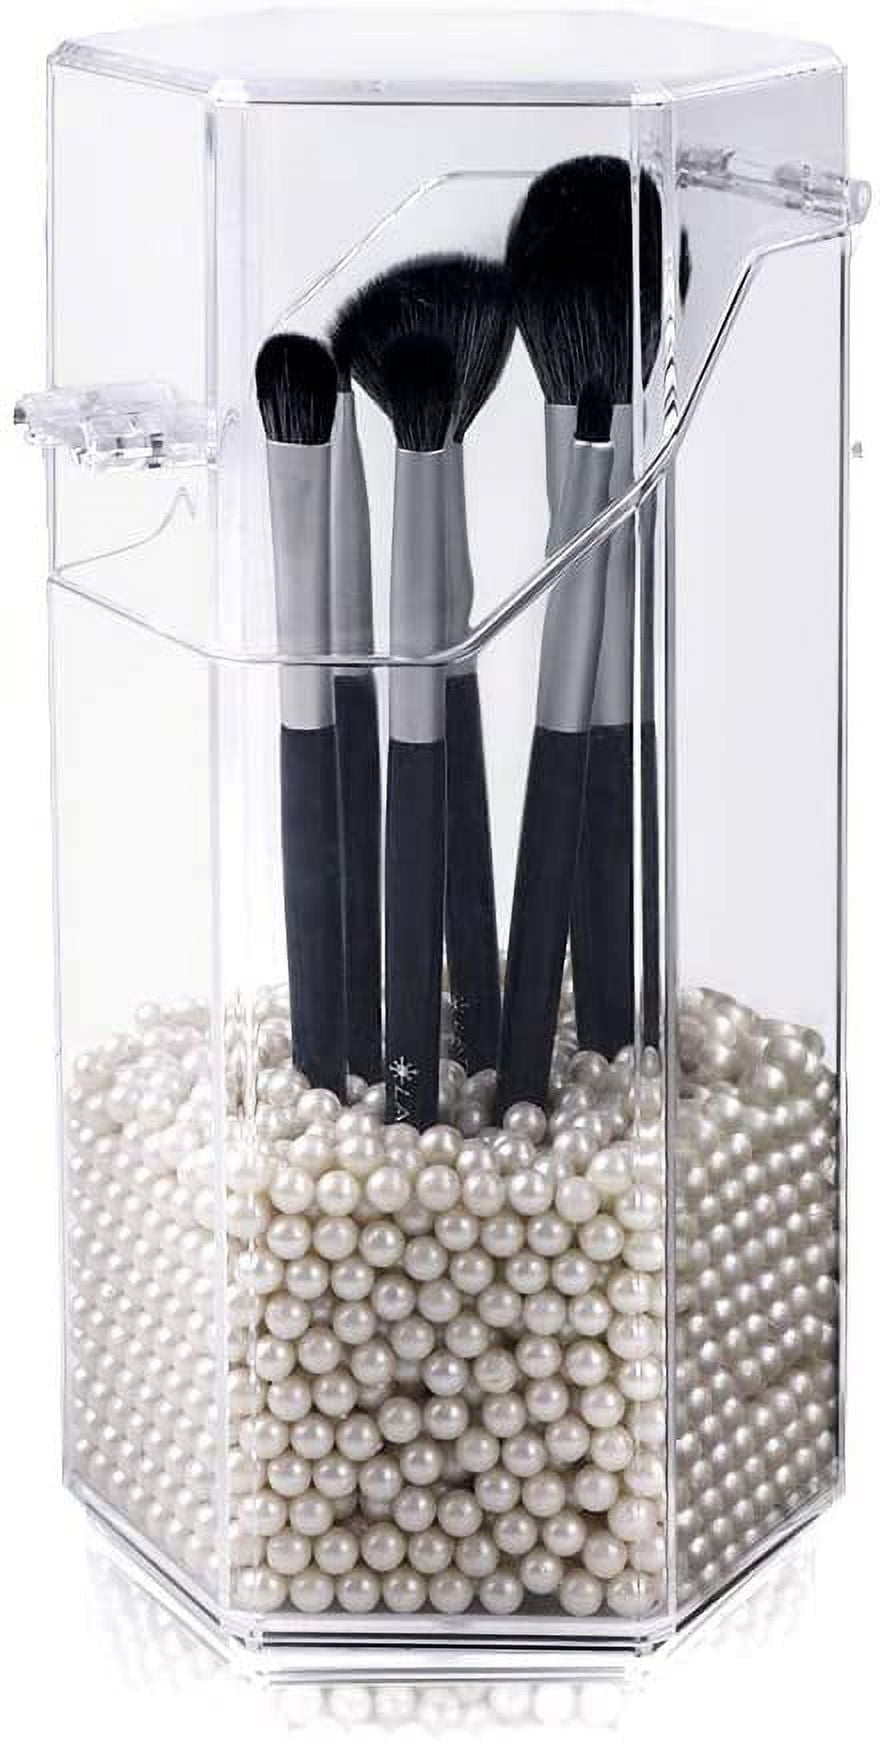 Acrylic Makeup Brush Holder with Lid and Beads Cosmetic Storage